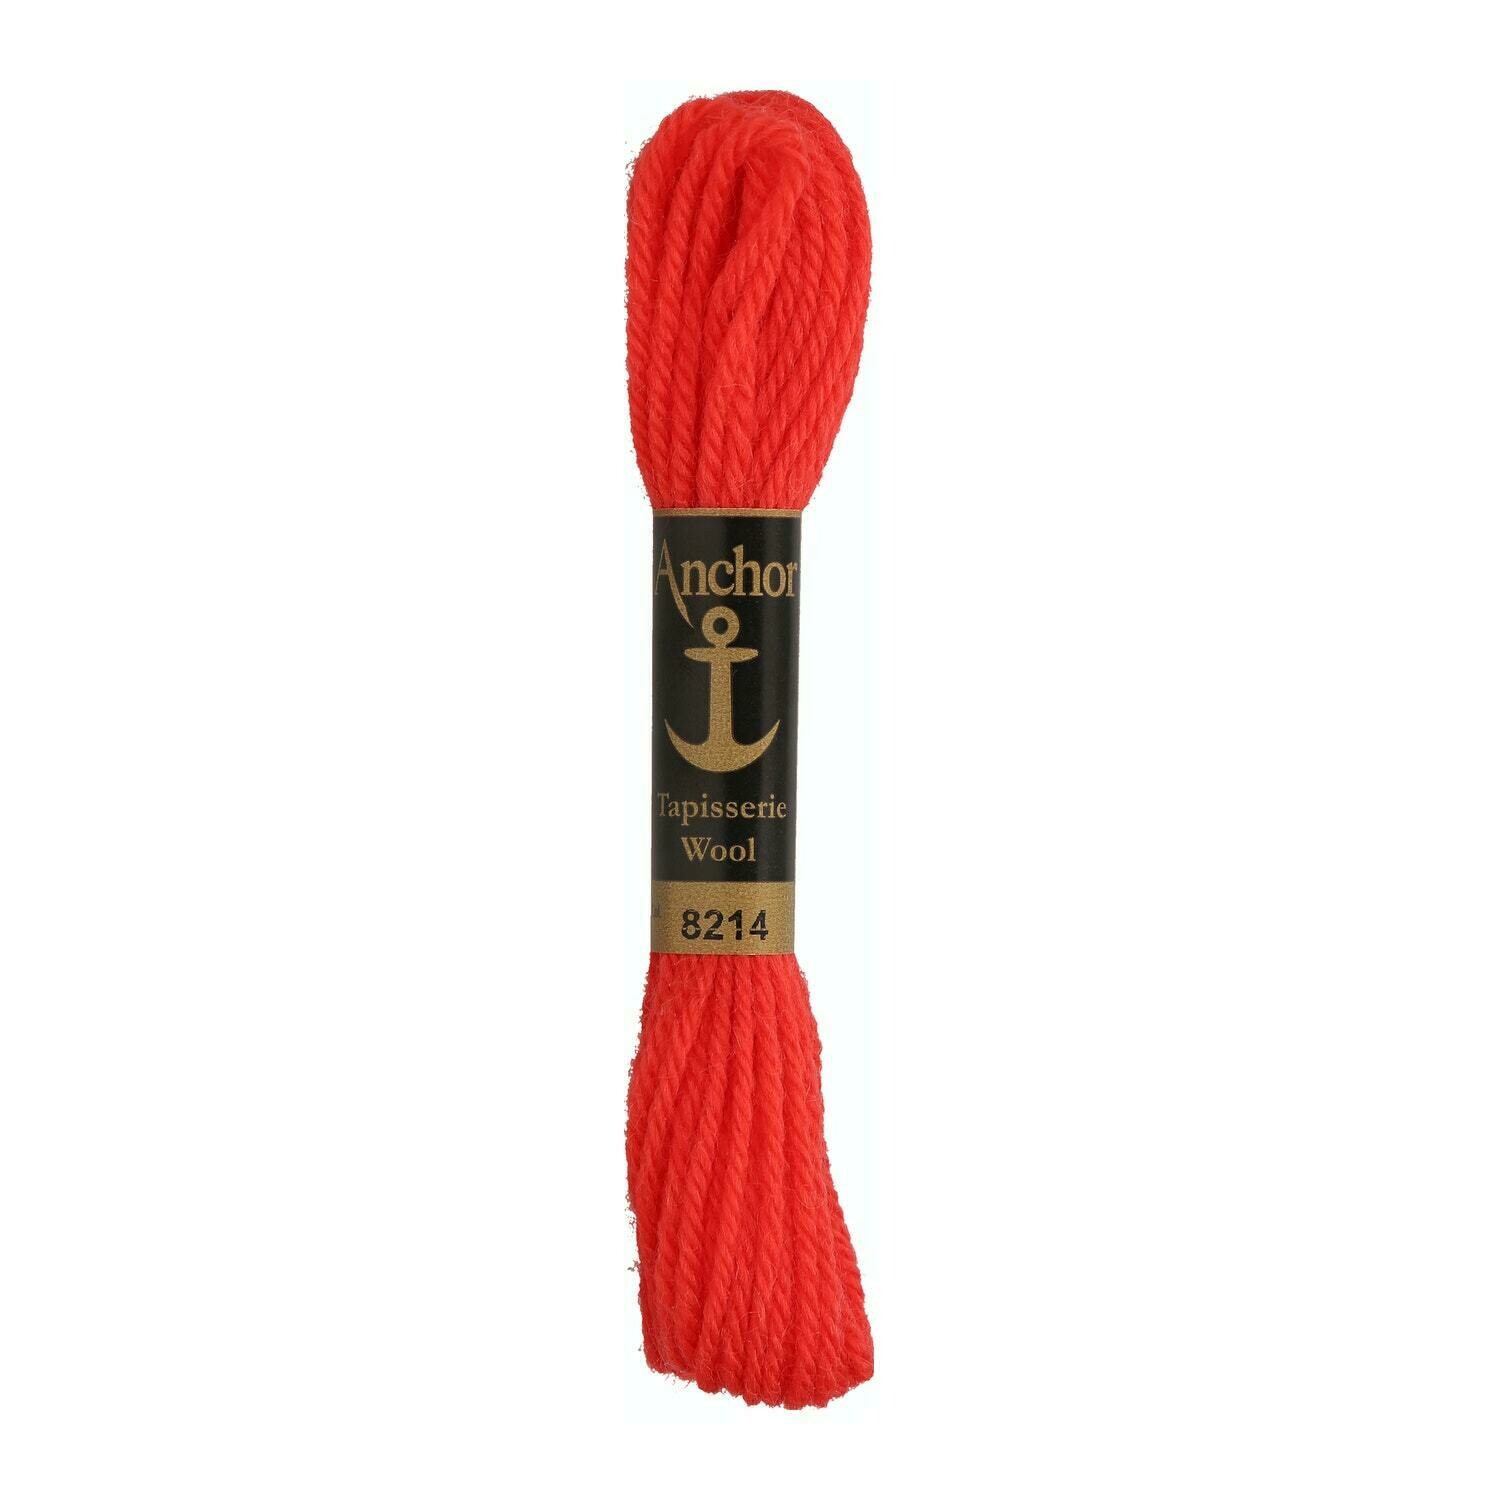 Anchor Tapisserie Wool #08214